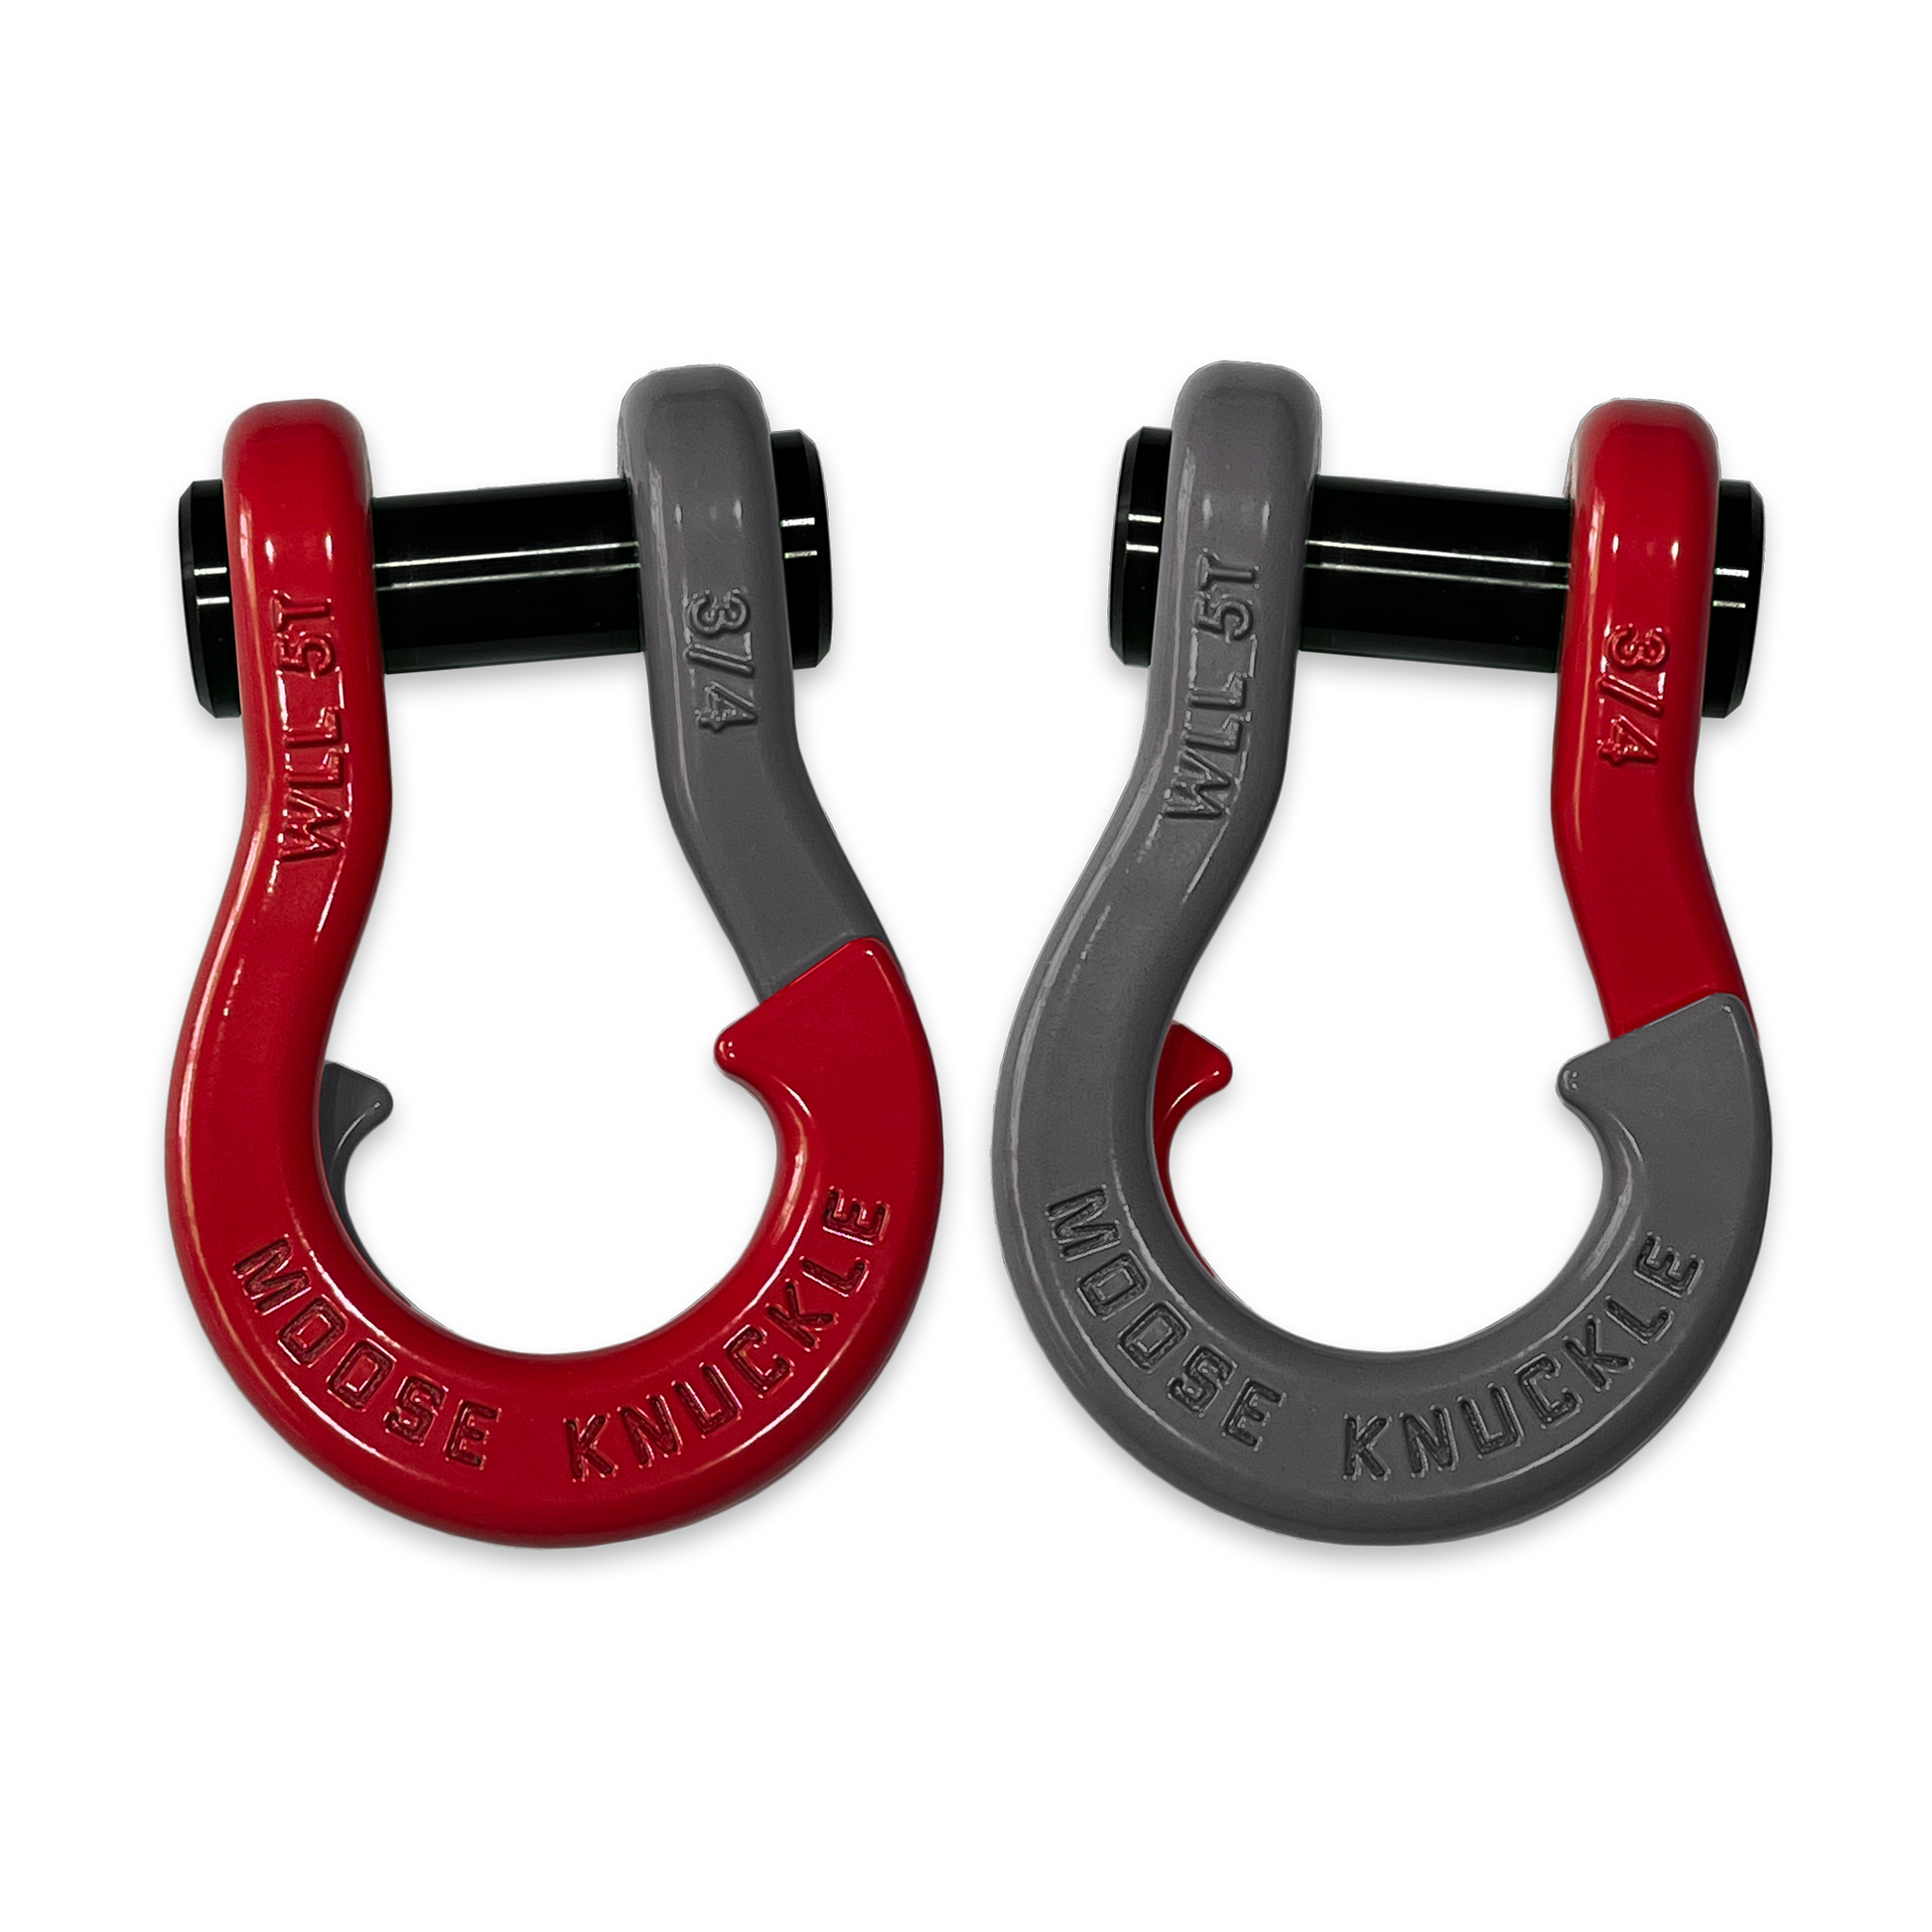 Moose Knuckle's Jowl Recovery Split Shackle 3/4 in Flame Red and Gun Gray Combo